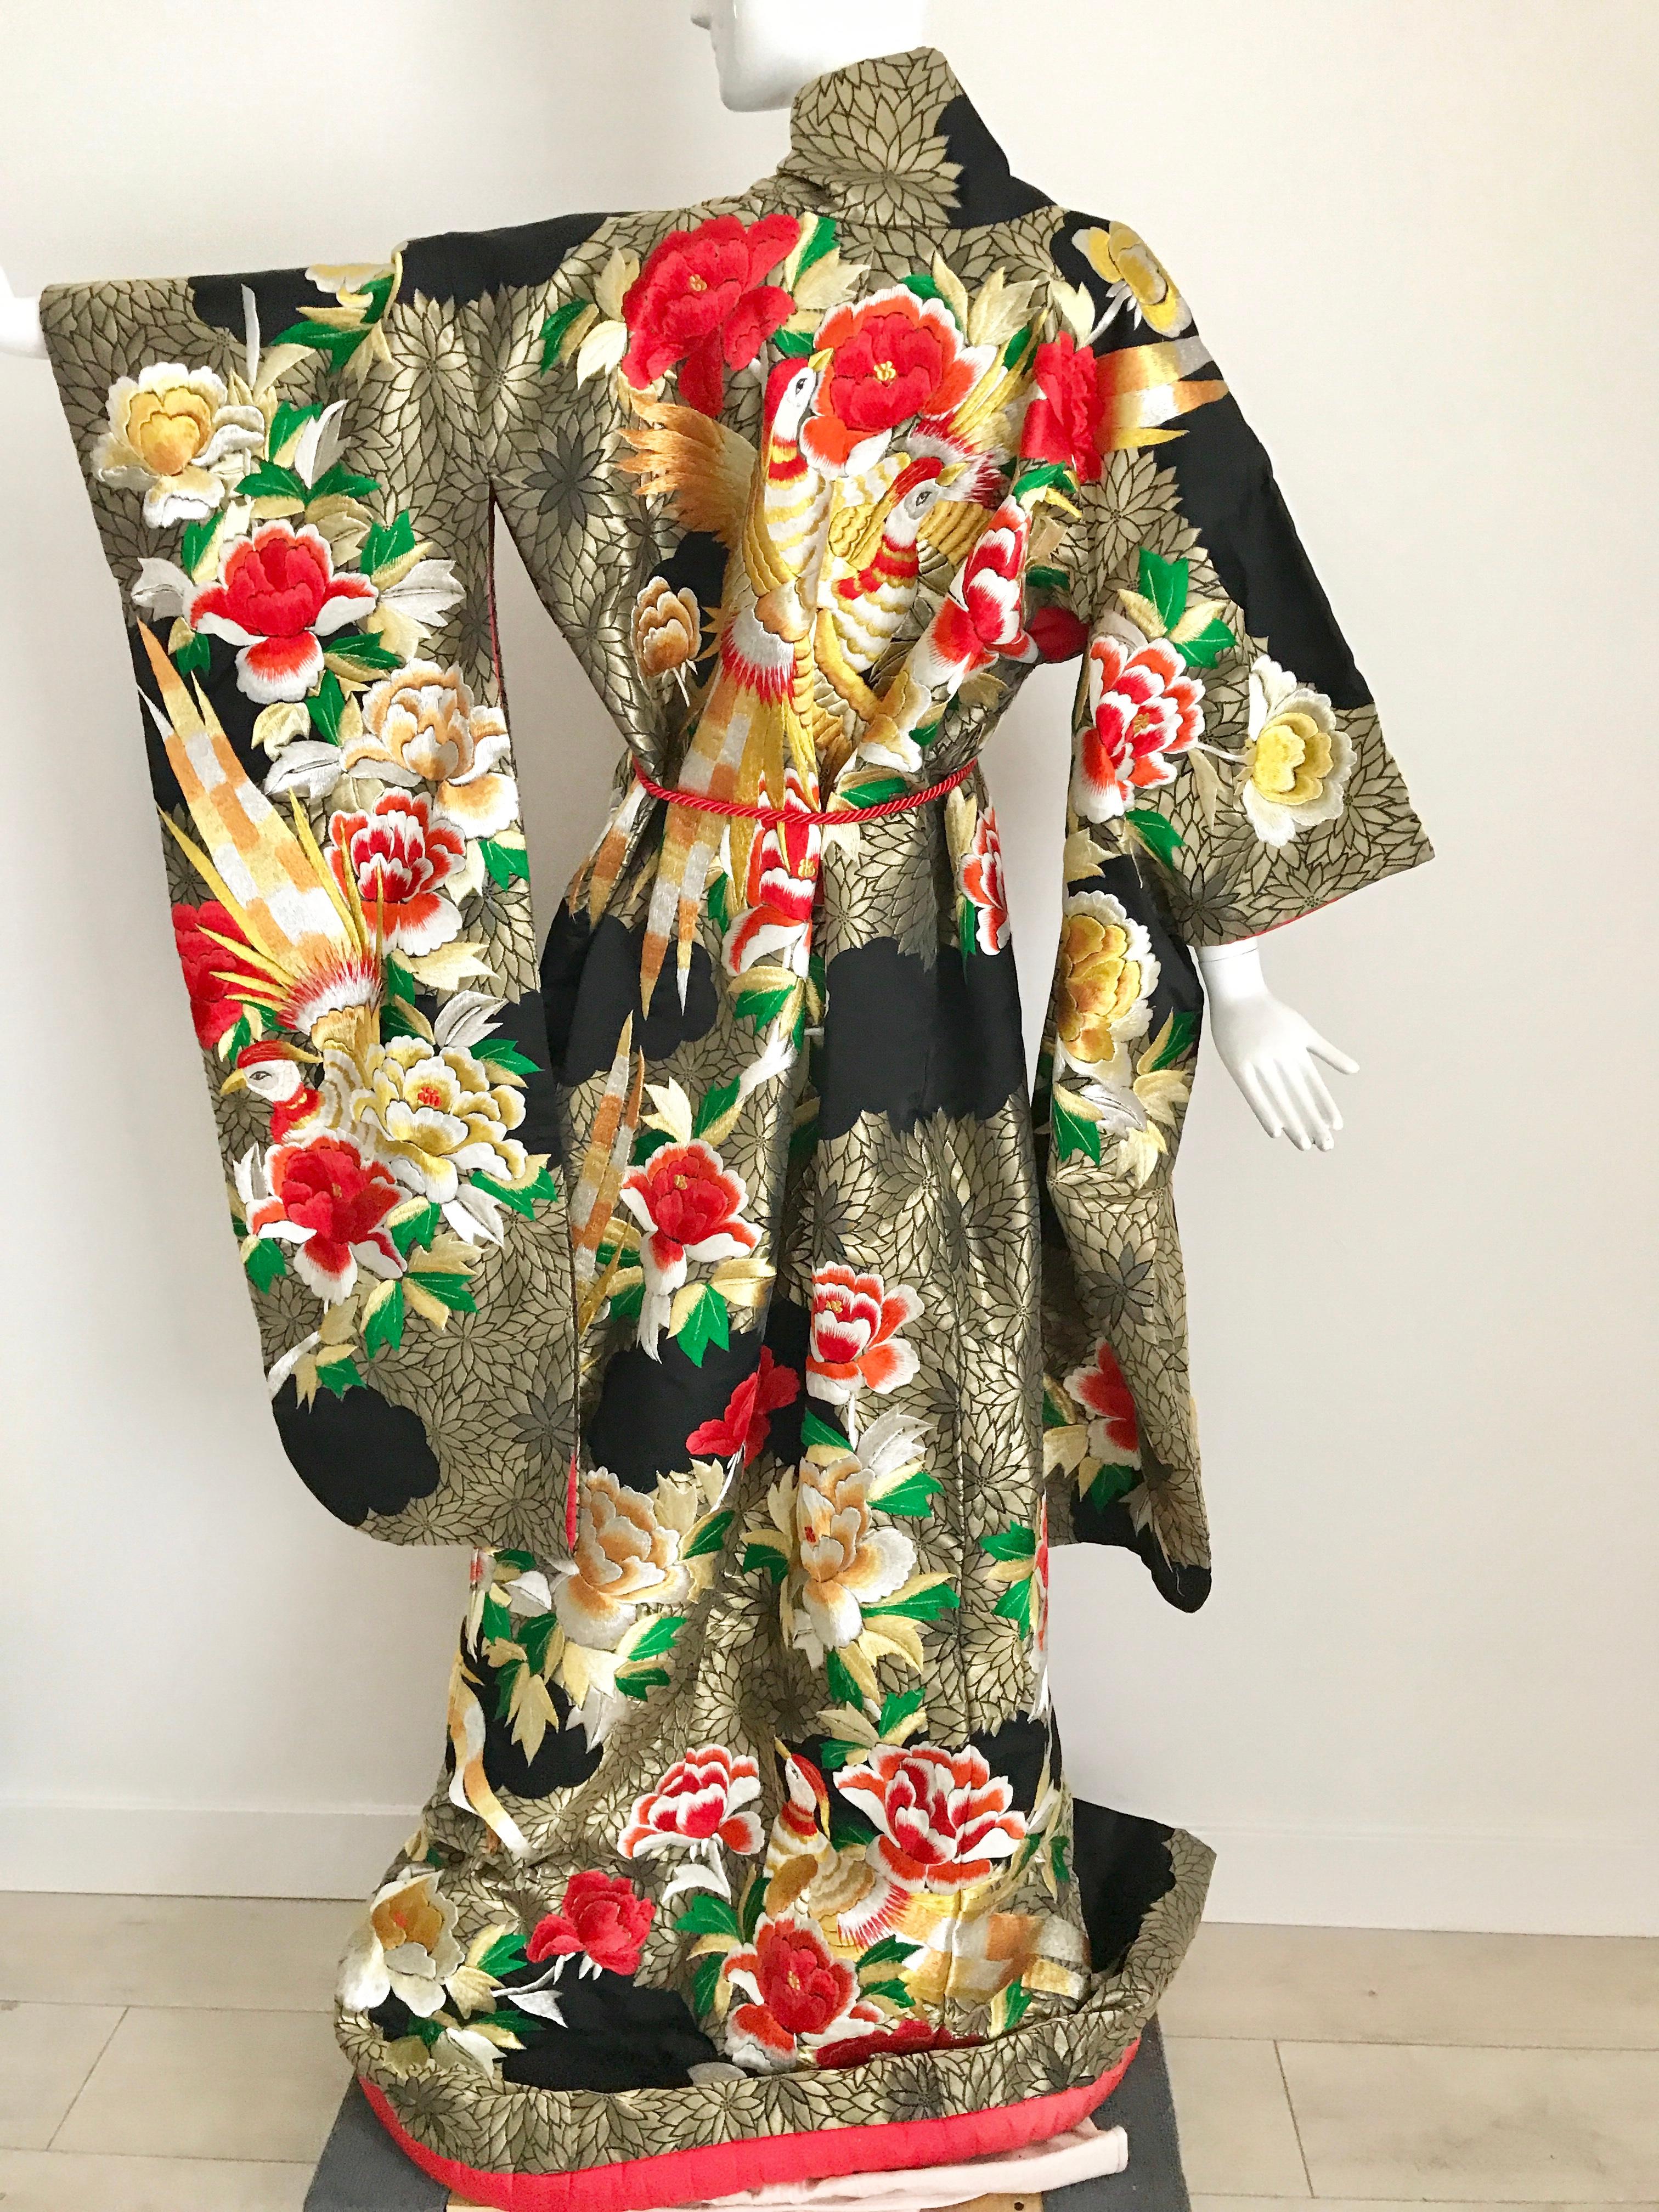 Beautiful vintage Japanese ceremonial brocade kimono embroidered with red and gold floral and Phoenix embroidery. Kimono comes with red rope belt.
Kimono length: 74” length
Note about the flaws: 
The entirety of the external fabric is flawless,